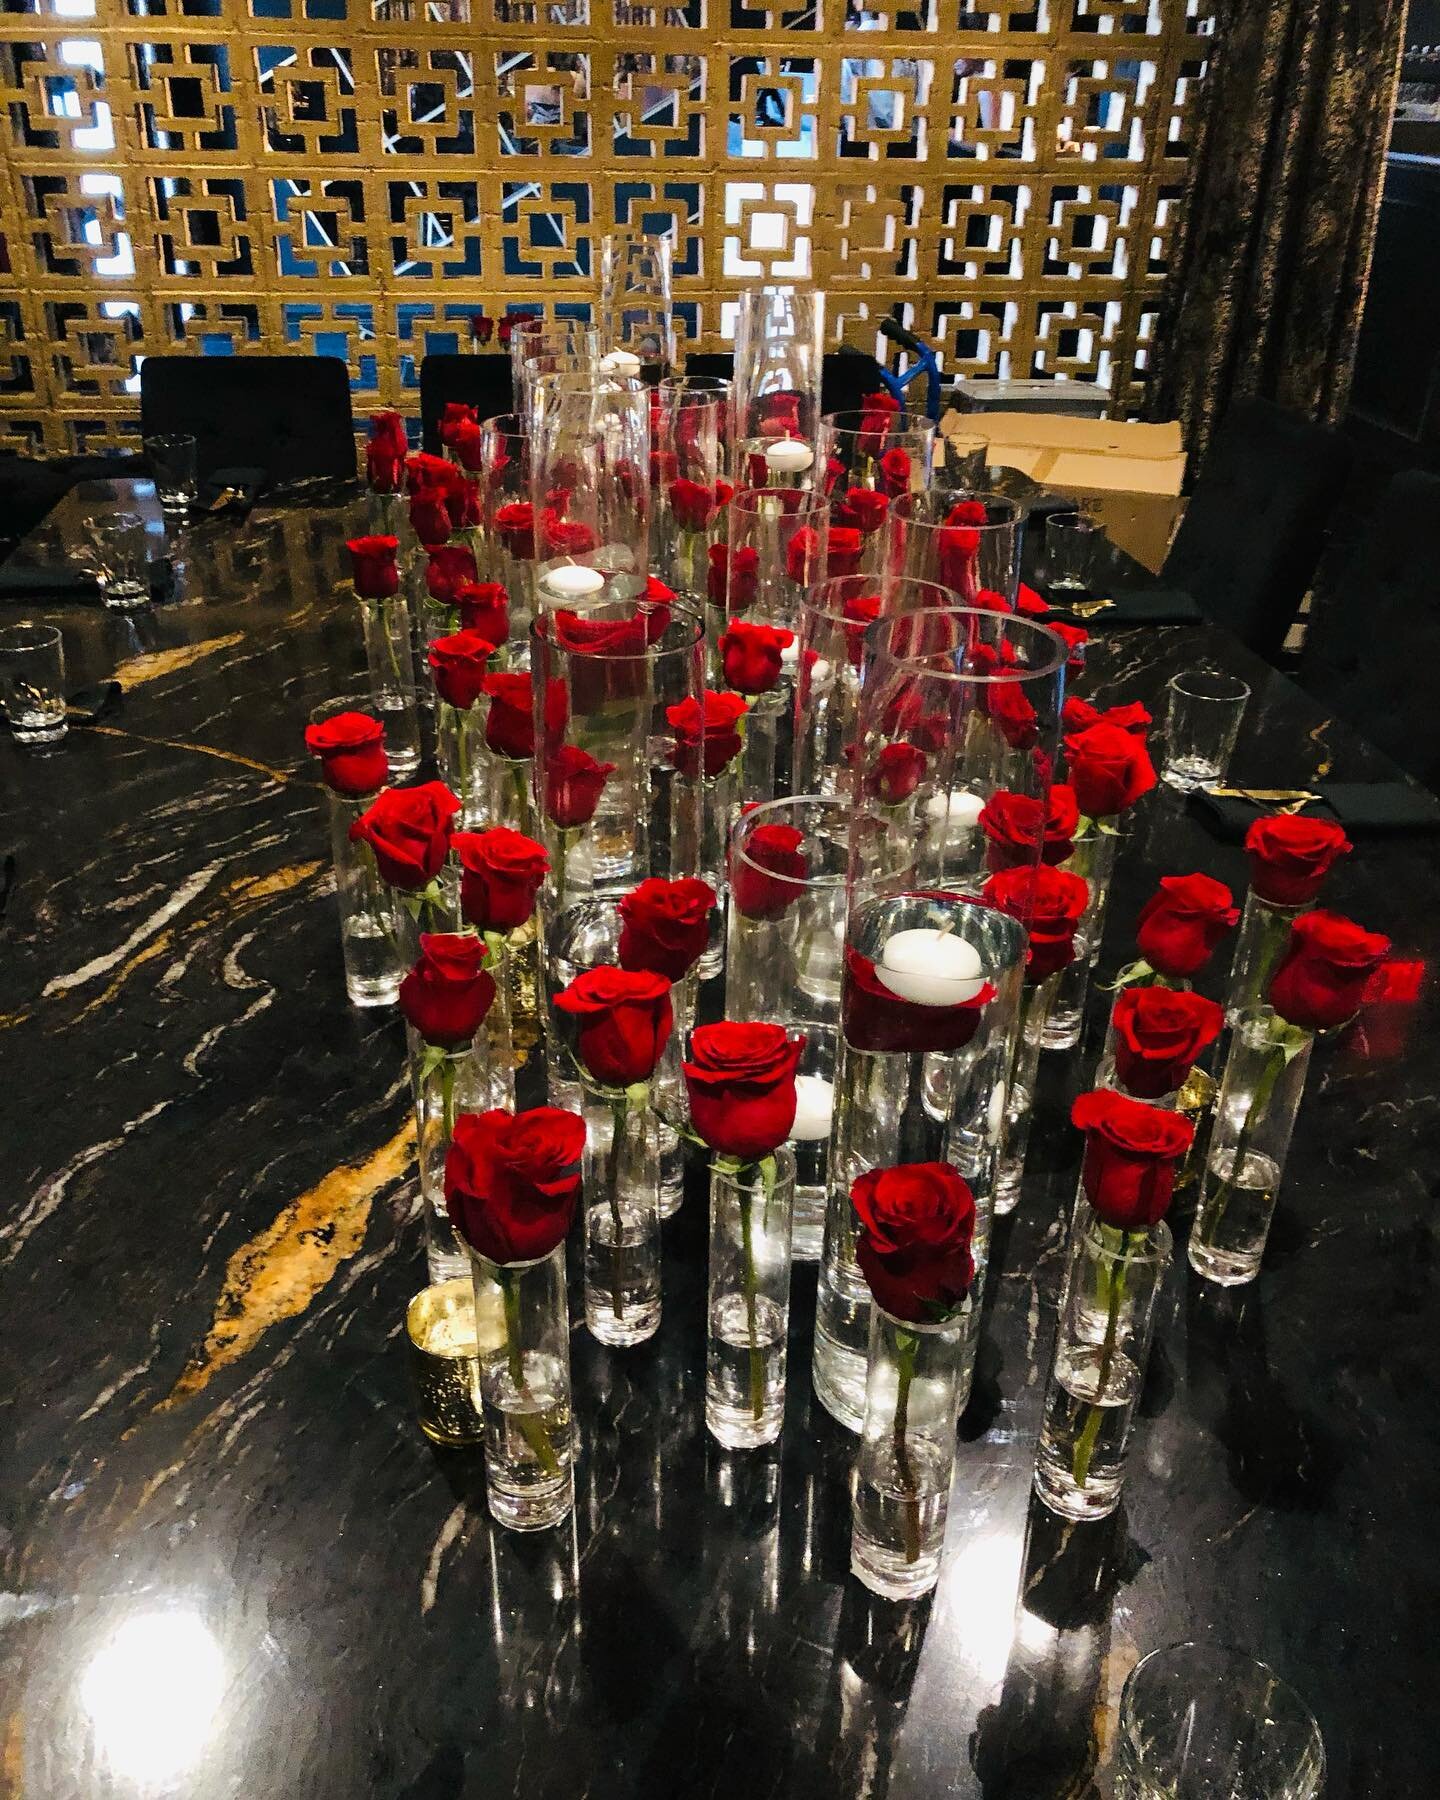 Roses &amp; Candles are always a perfect match. 🌹 🕯️
It&rsquo;s all about the details! 
.
.
.
.
.
.
.
#redroses #candlelight #romanticdinner #birthdayparty #partyslate #vibes #birthday #decor #desserttable #instalove #instagood #iphonesia  #igdaily